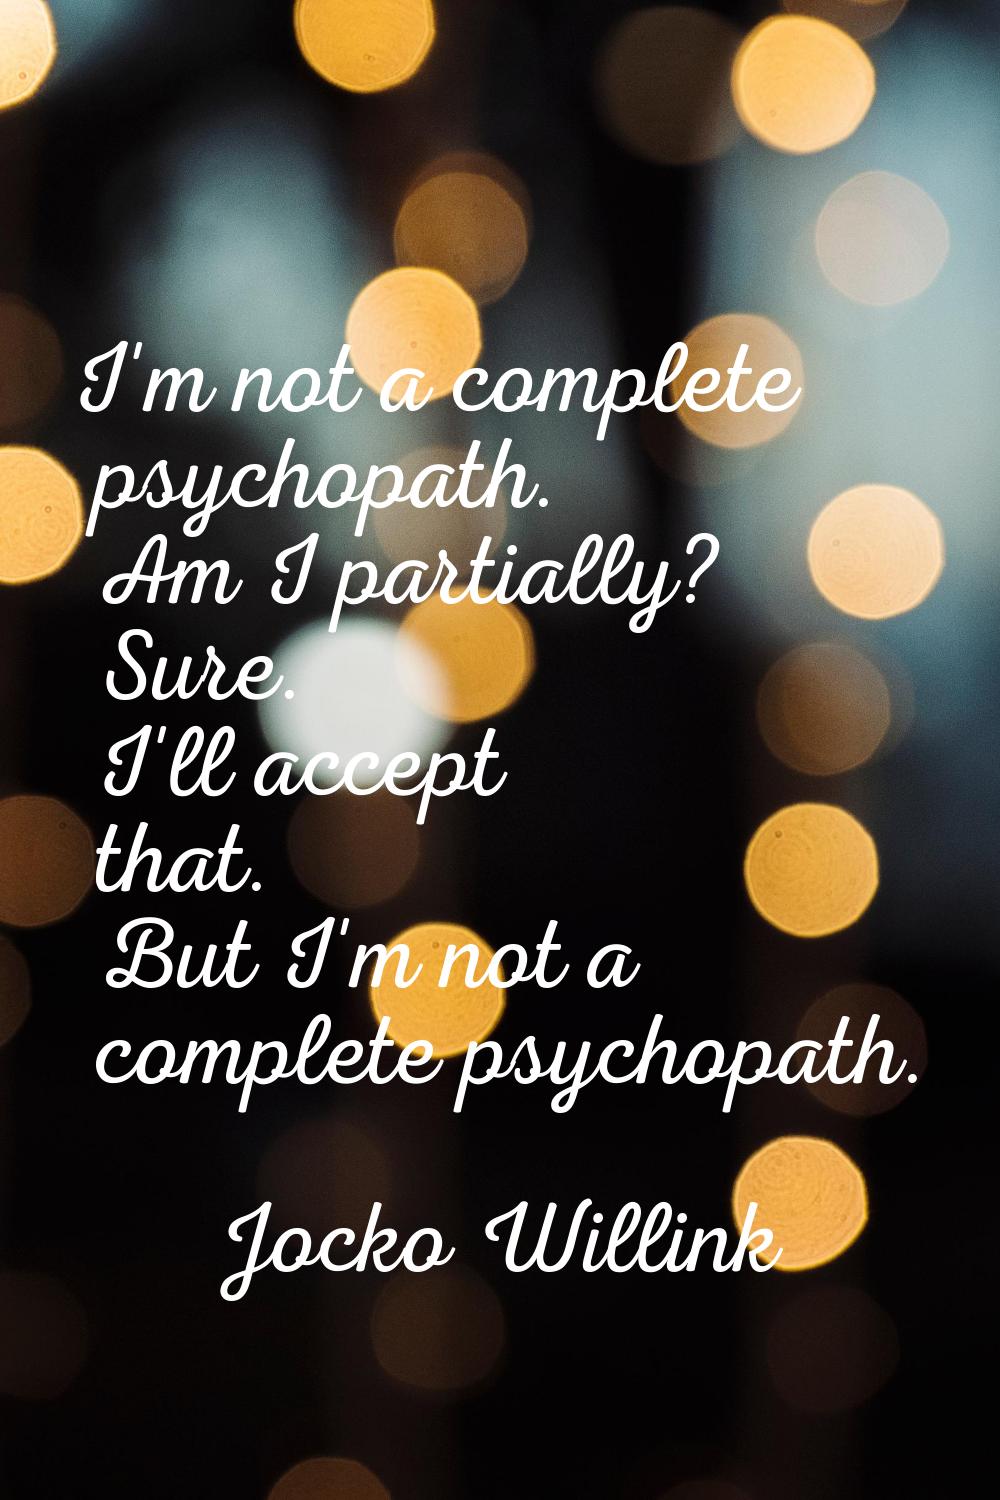 I'm not a complete psychopath. Am I partially? Sure. I'll accept that. But I'm not a complete psych